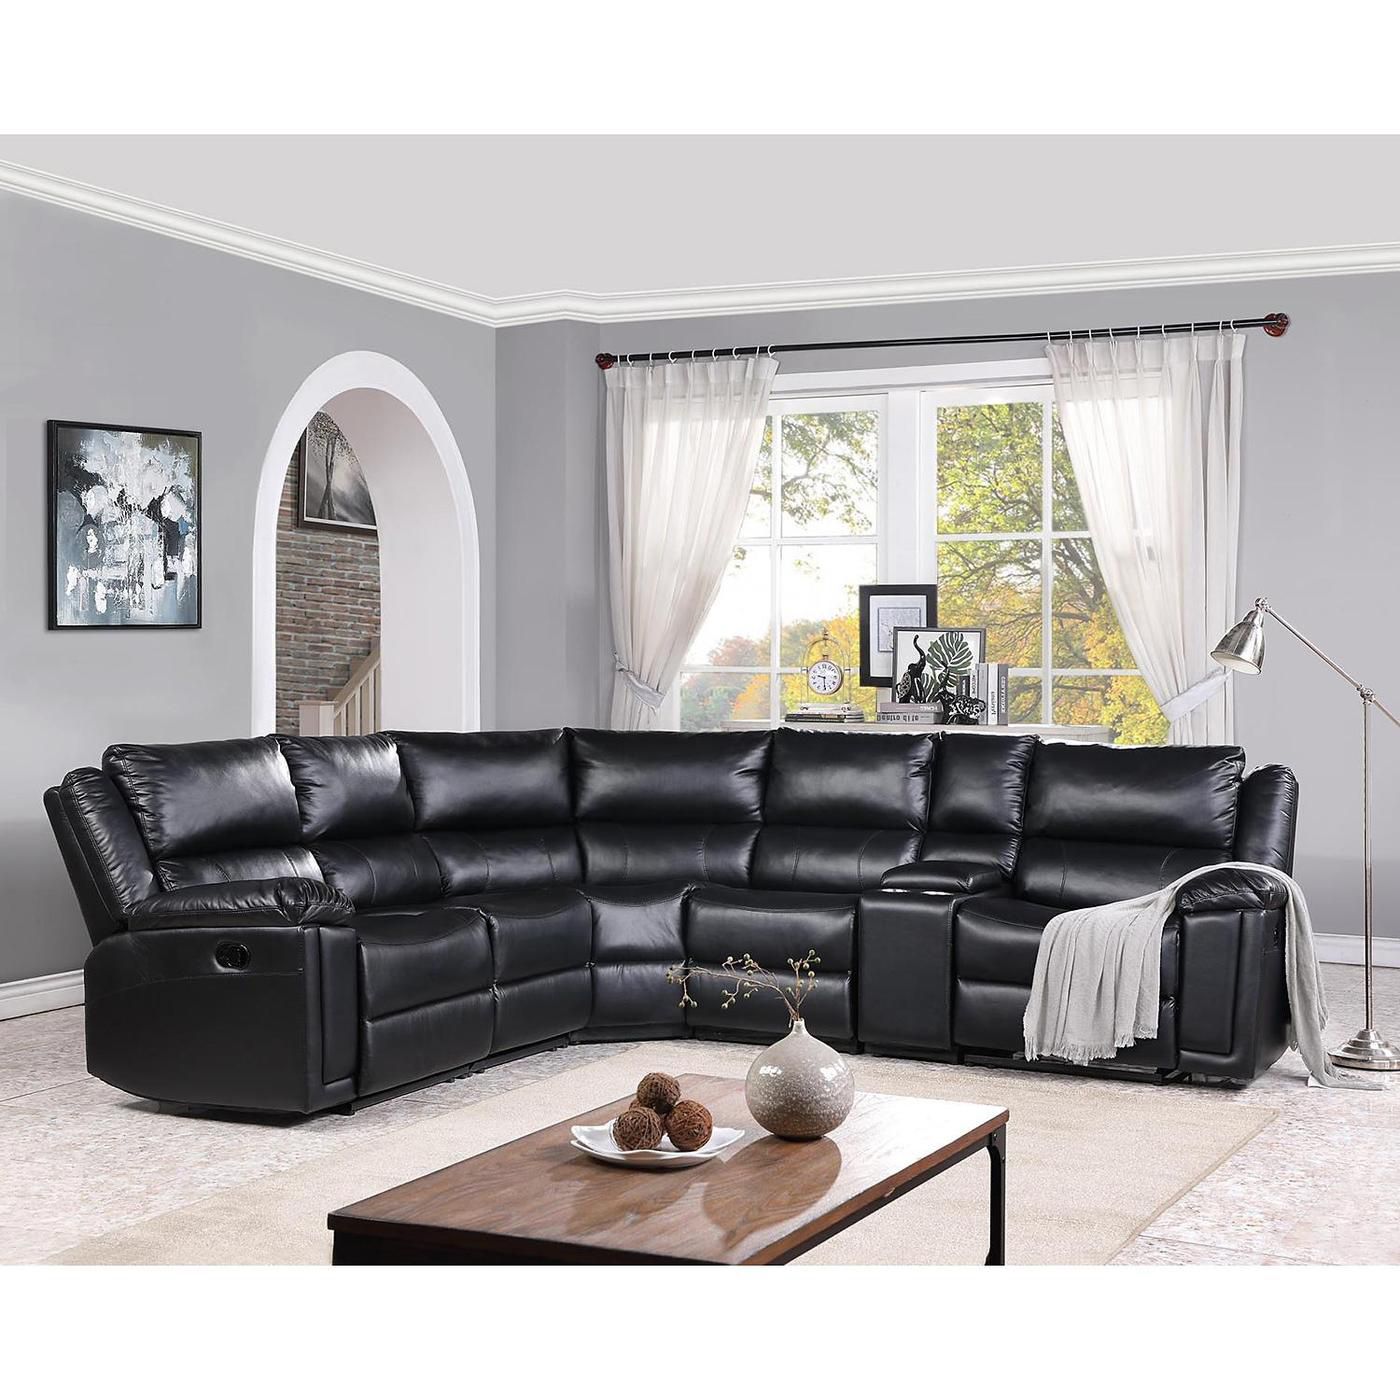 Kingston reclining sectional(black) with USB ports and cup holders